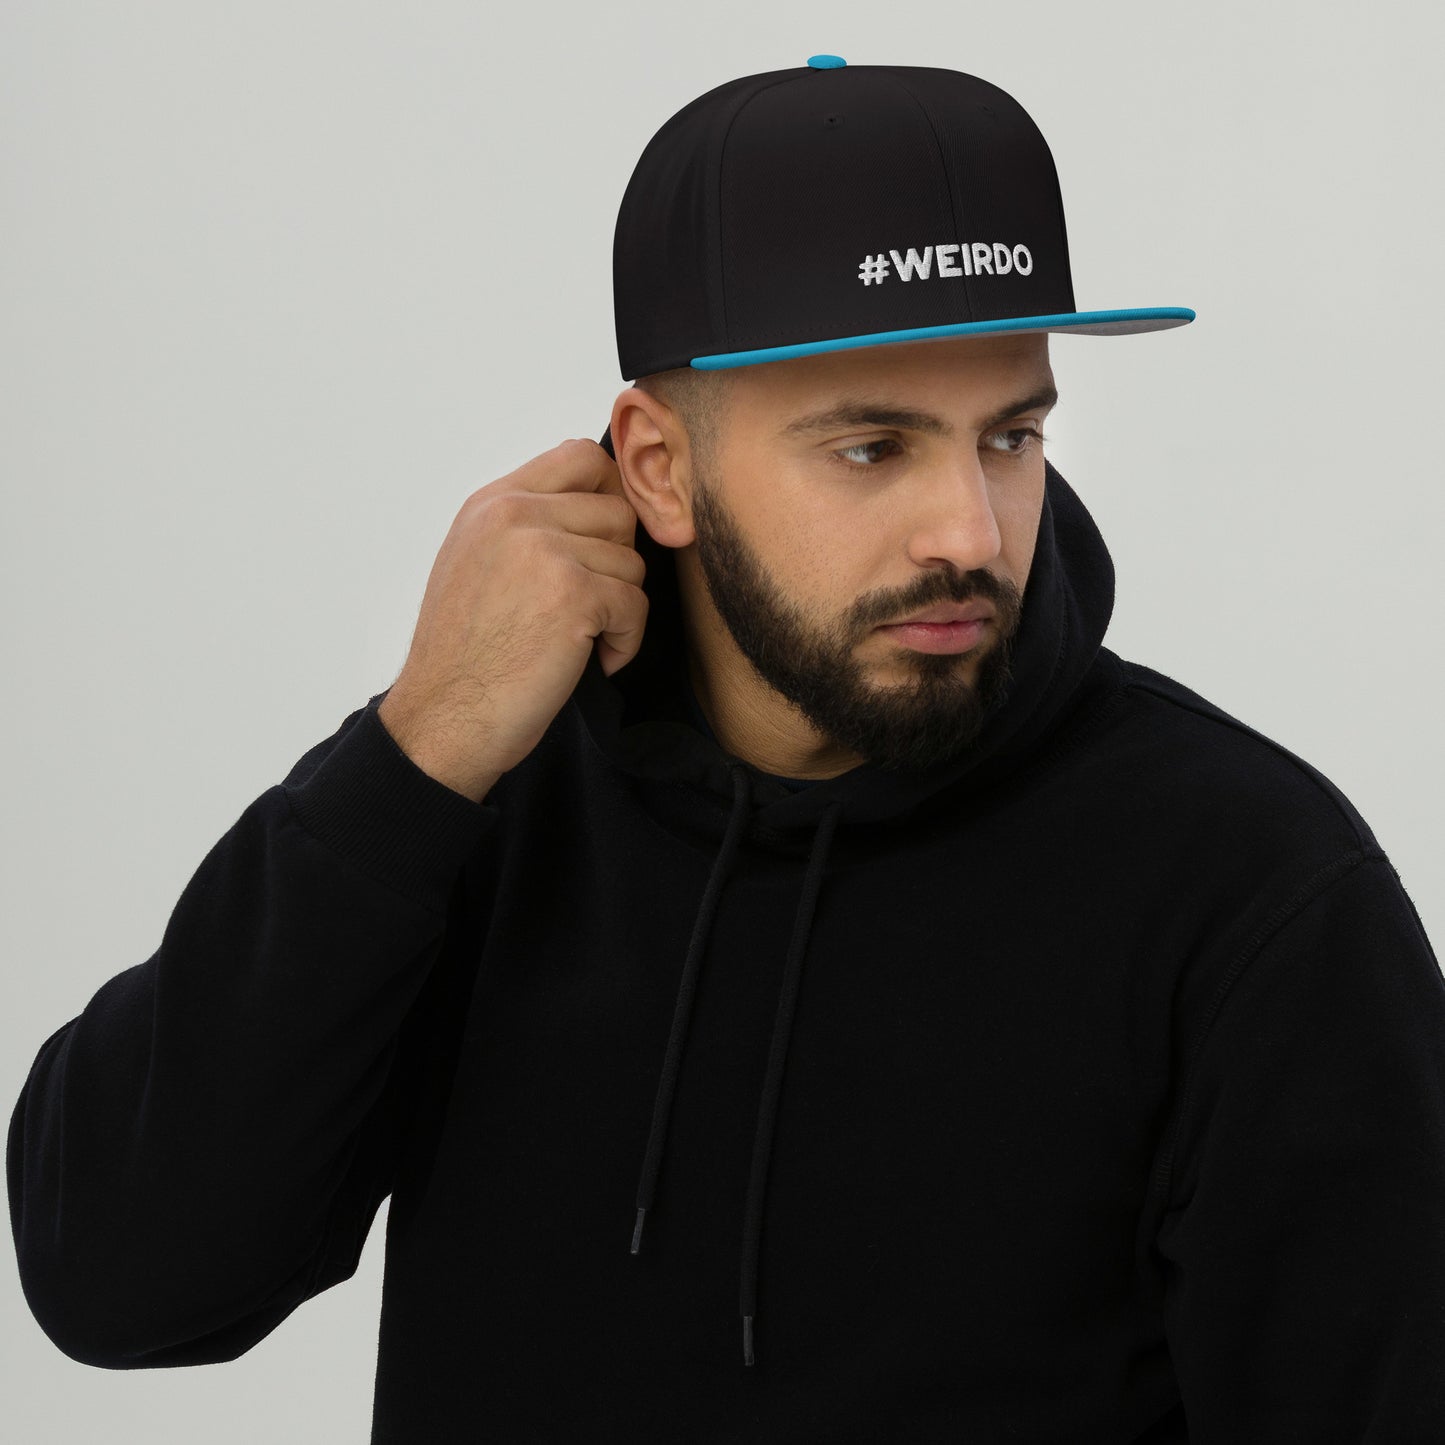 #WEIRDO meme is embroidered in white at the front of this black and blue snapback cap. We got this and many more funny hats for adults who are weird! Check out all our weird gifts for weird people in our online gift store for weirdos!